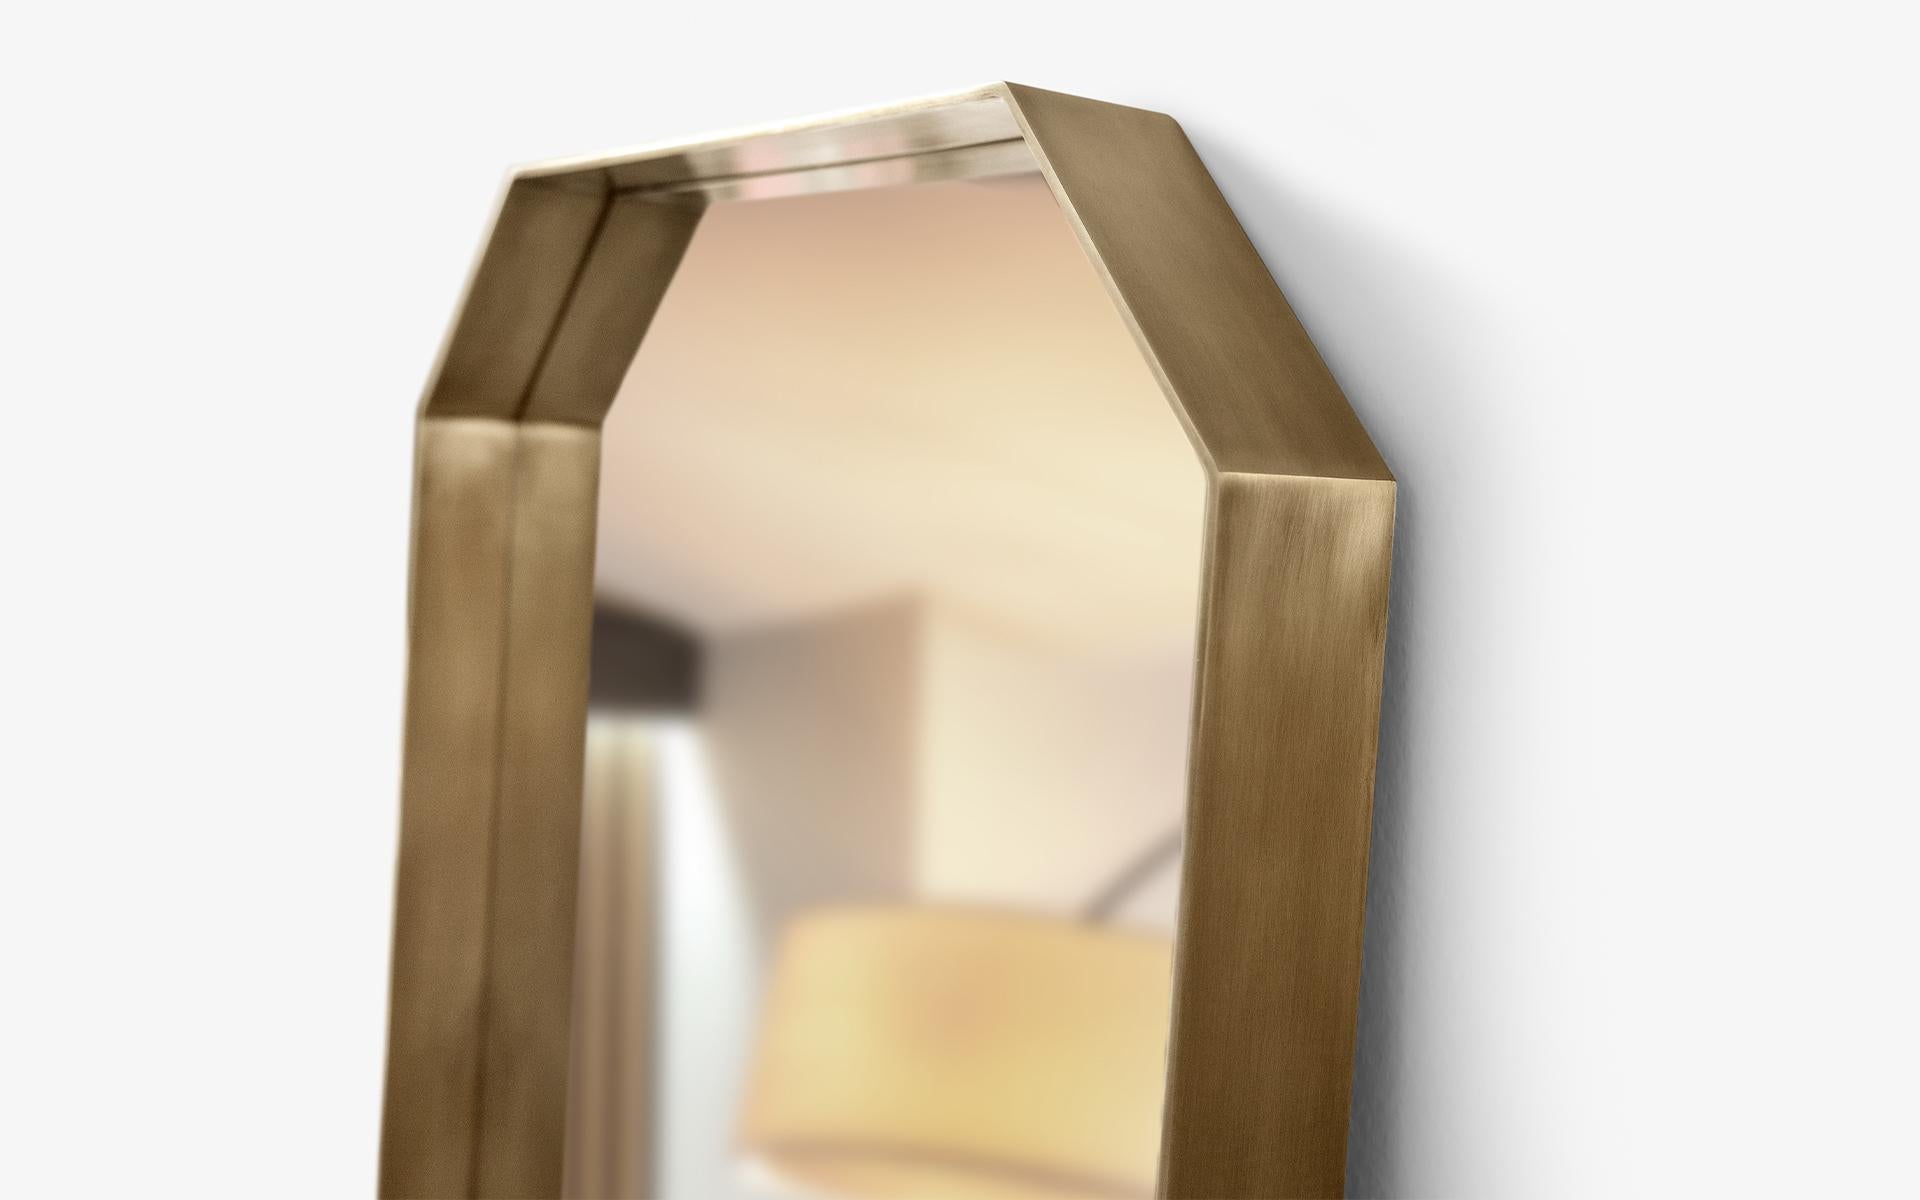 Cut full length mirror distinguishes itself from standard rectangular mirrors by adding a unique touch to its design with its sharp corners. The sharp edges create a balanced and symmetrical aesthetic, while the warm undertones of brass add a